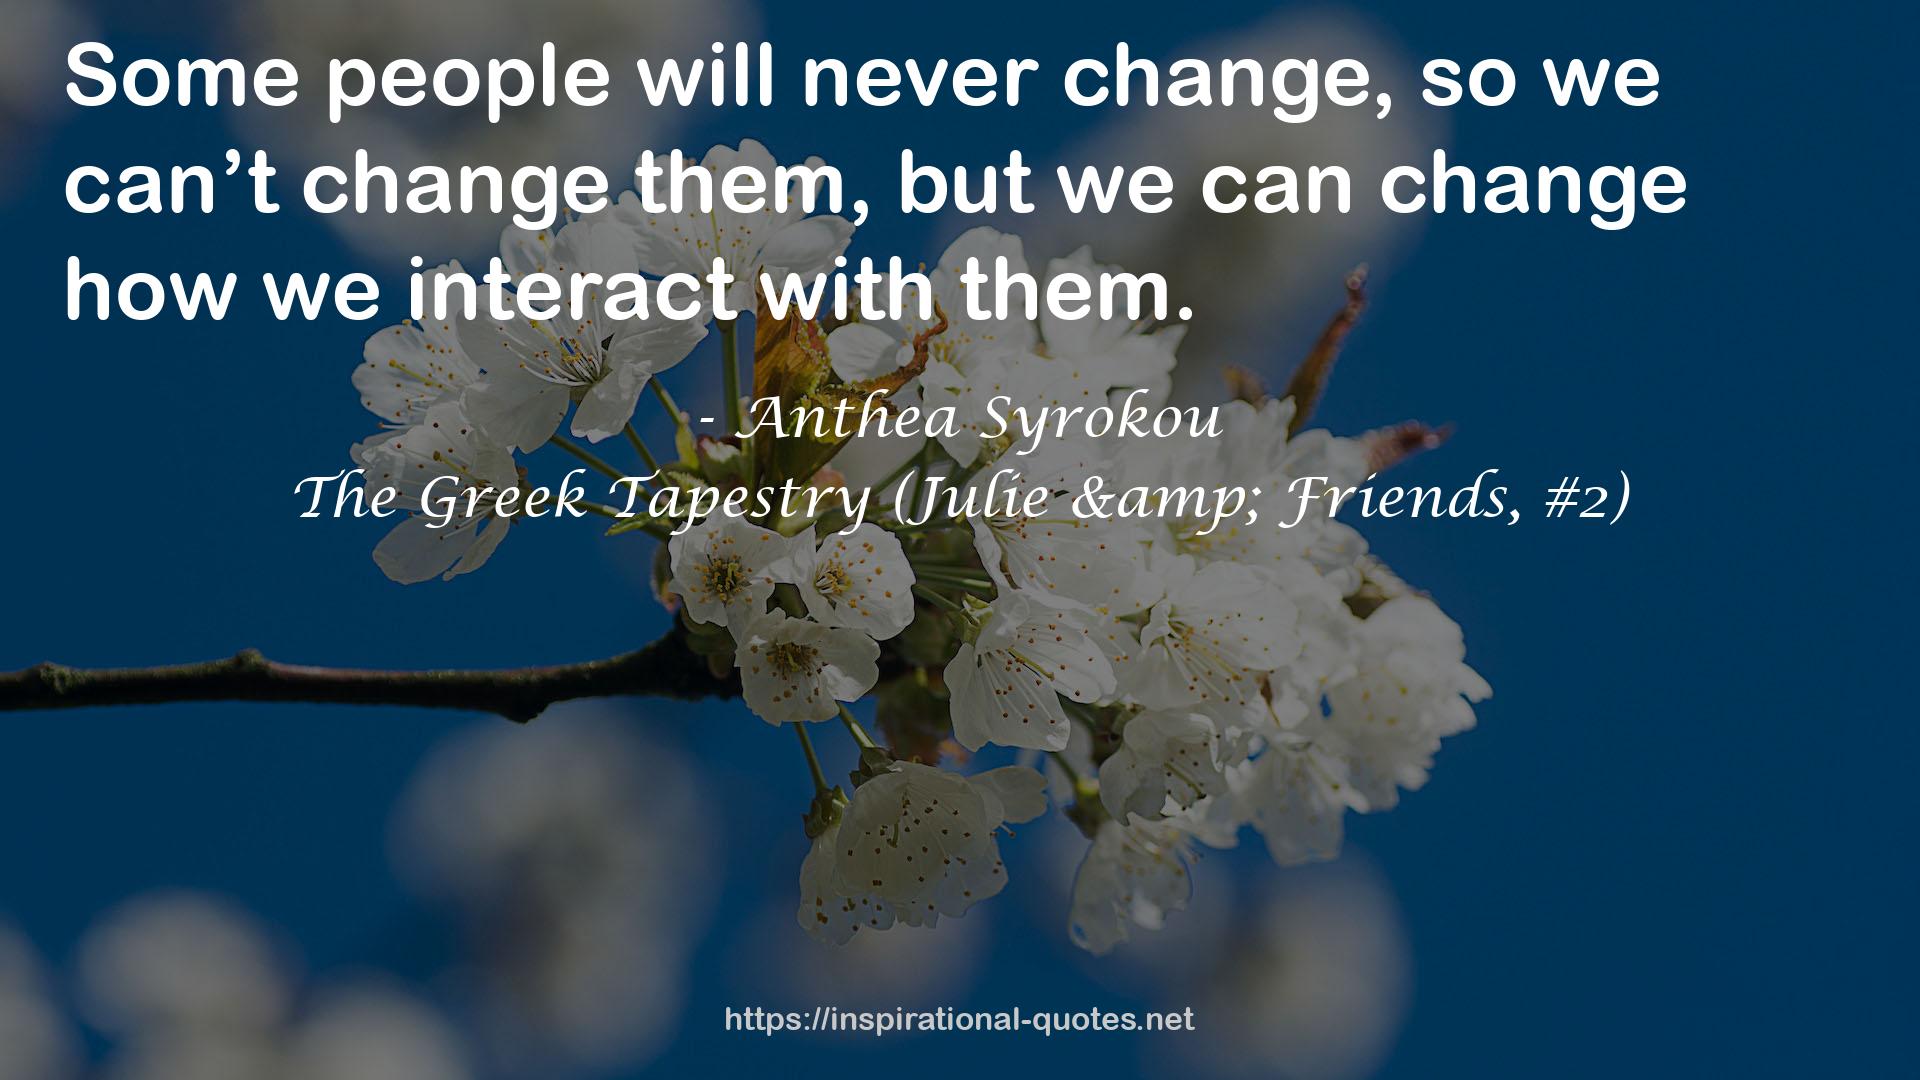 The Greek Tapestry (Julie & Friends, #2) QUOTES